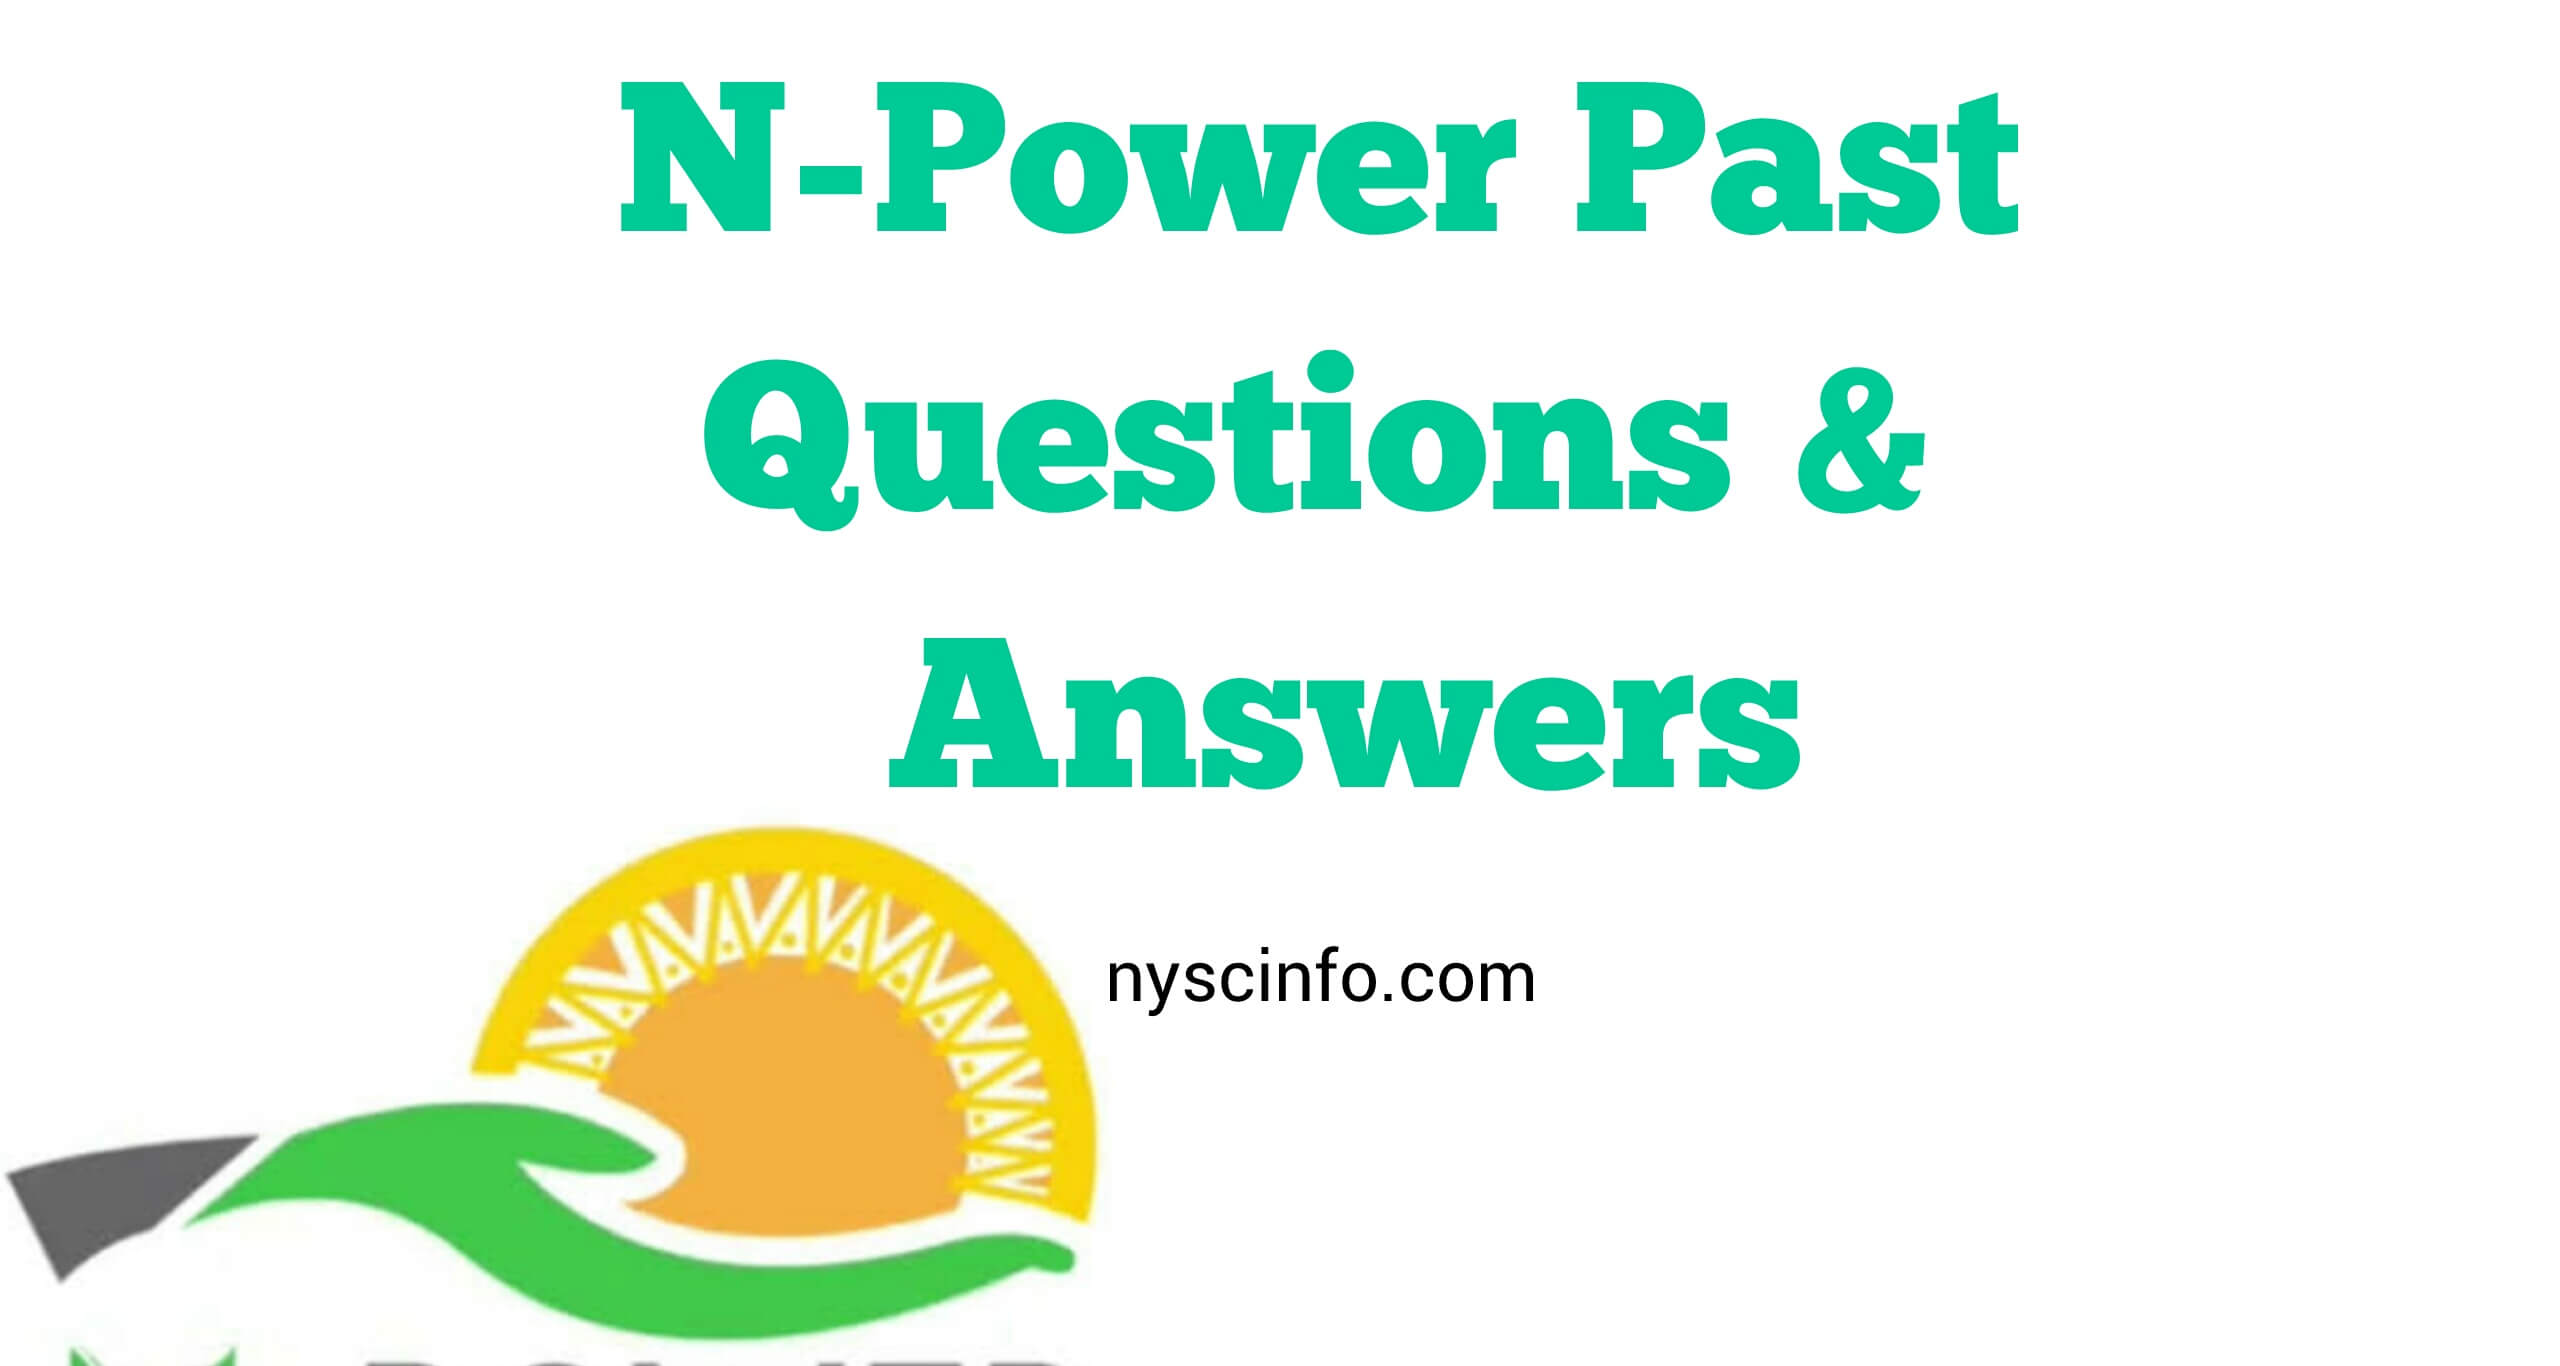 npower batch c selection test past questions answers pdf 2020 download here FCT Abuja 85RRI